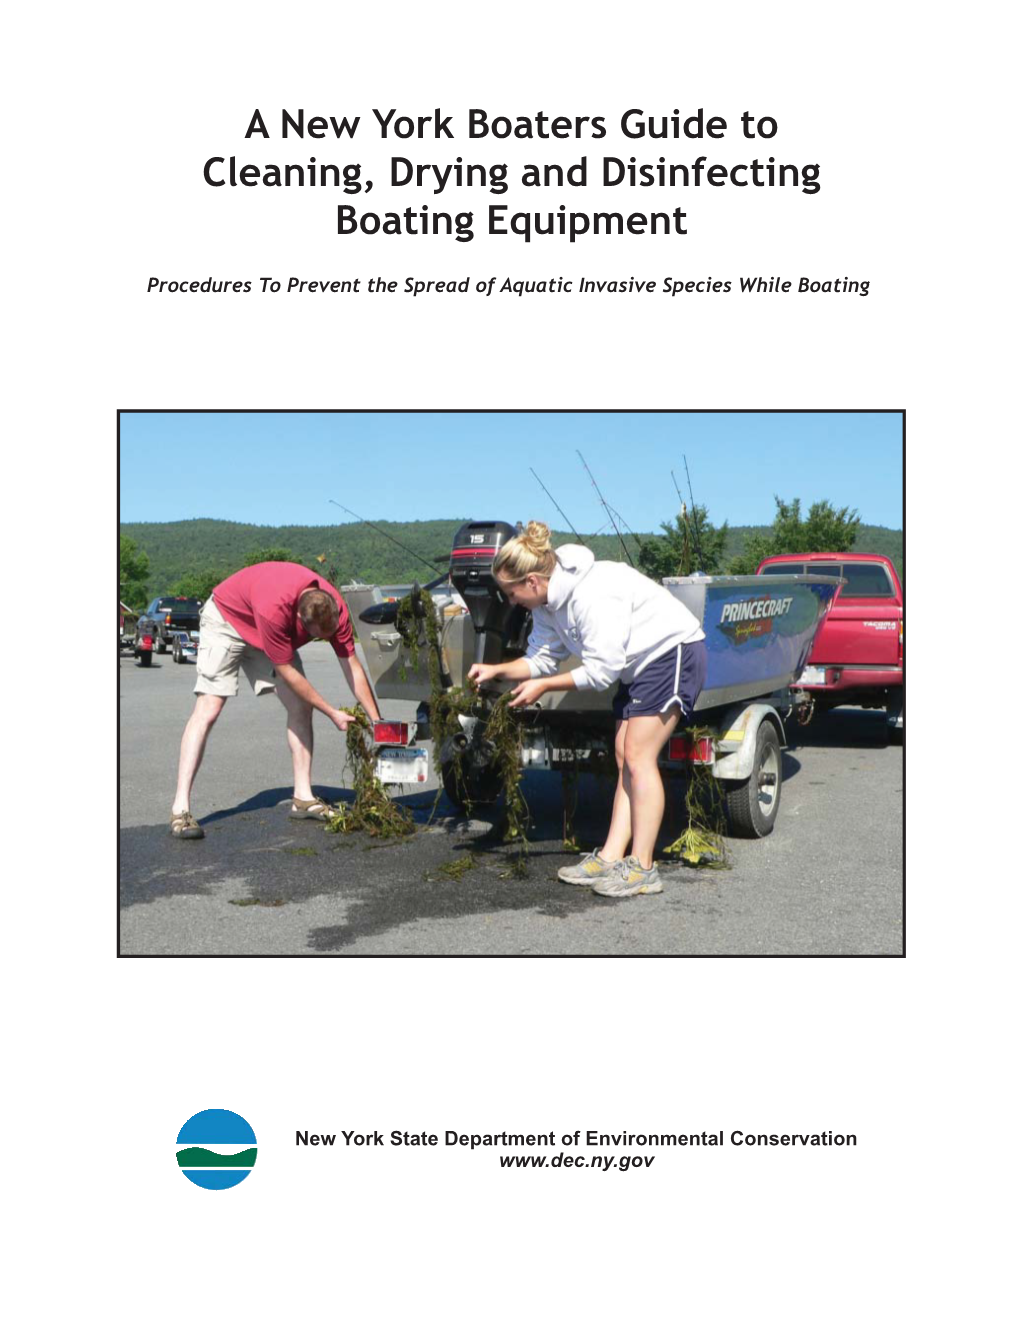 NY Boater's Guide to Cleaning, Drying, and Disinfecting Boating Equipment